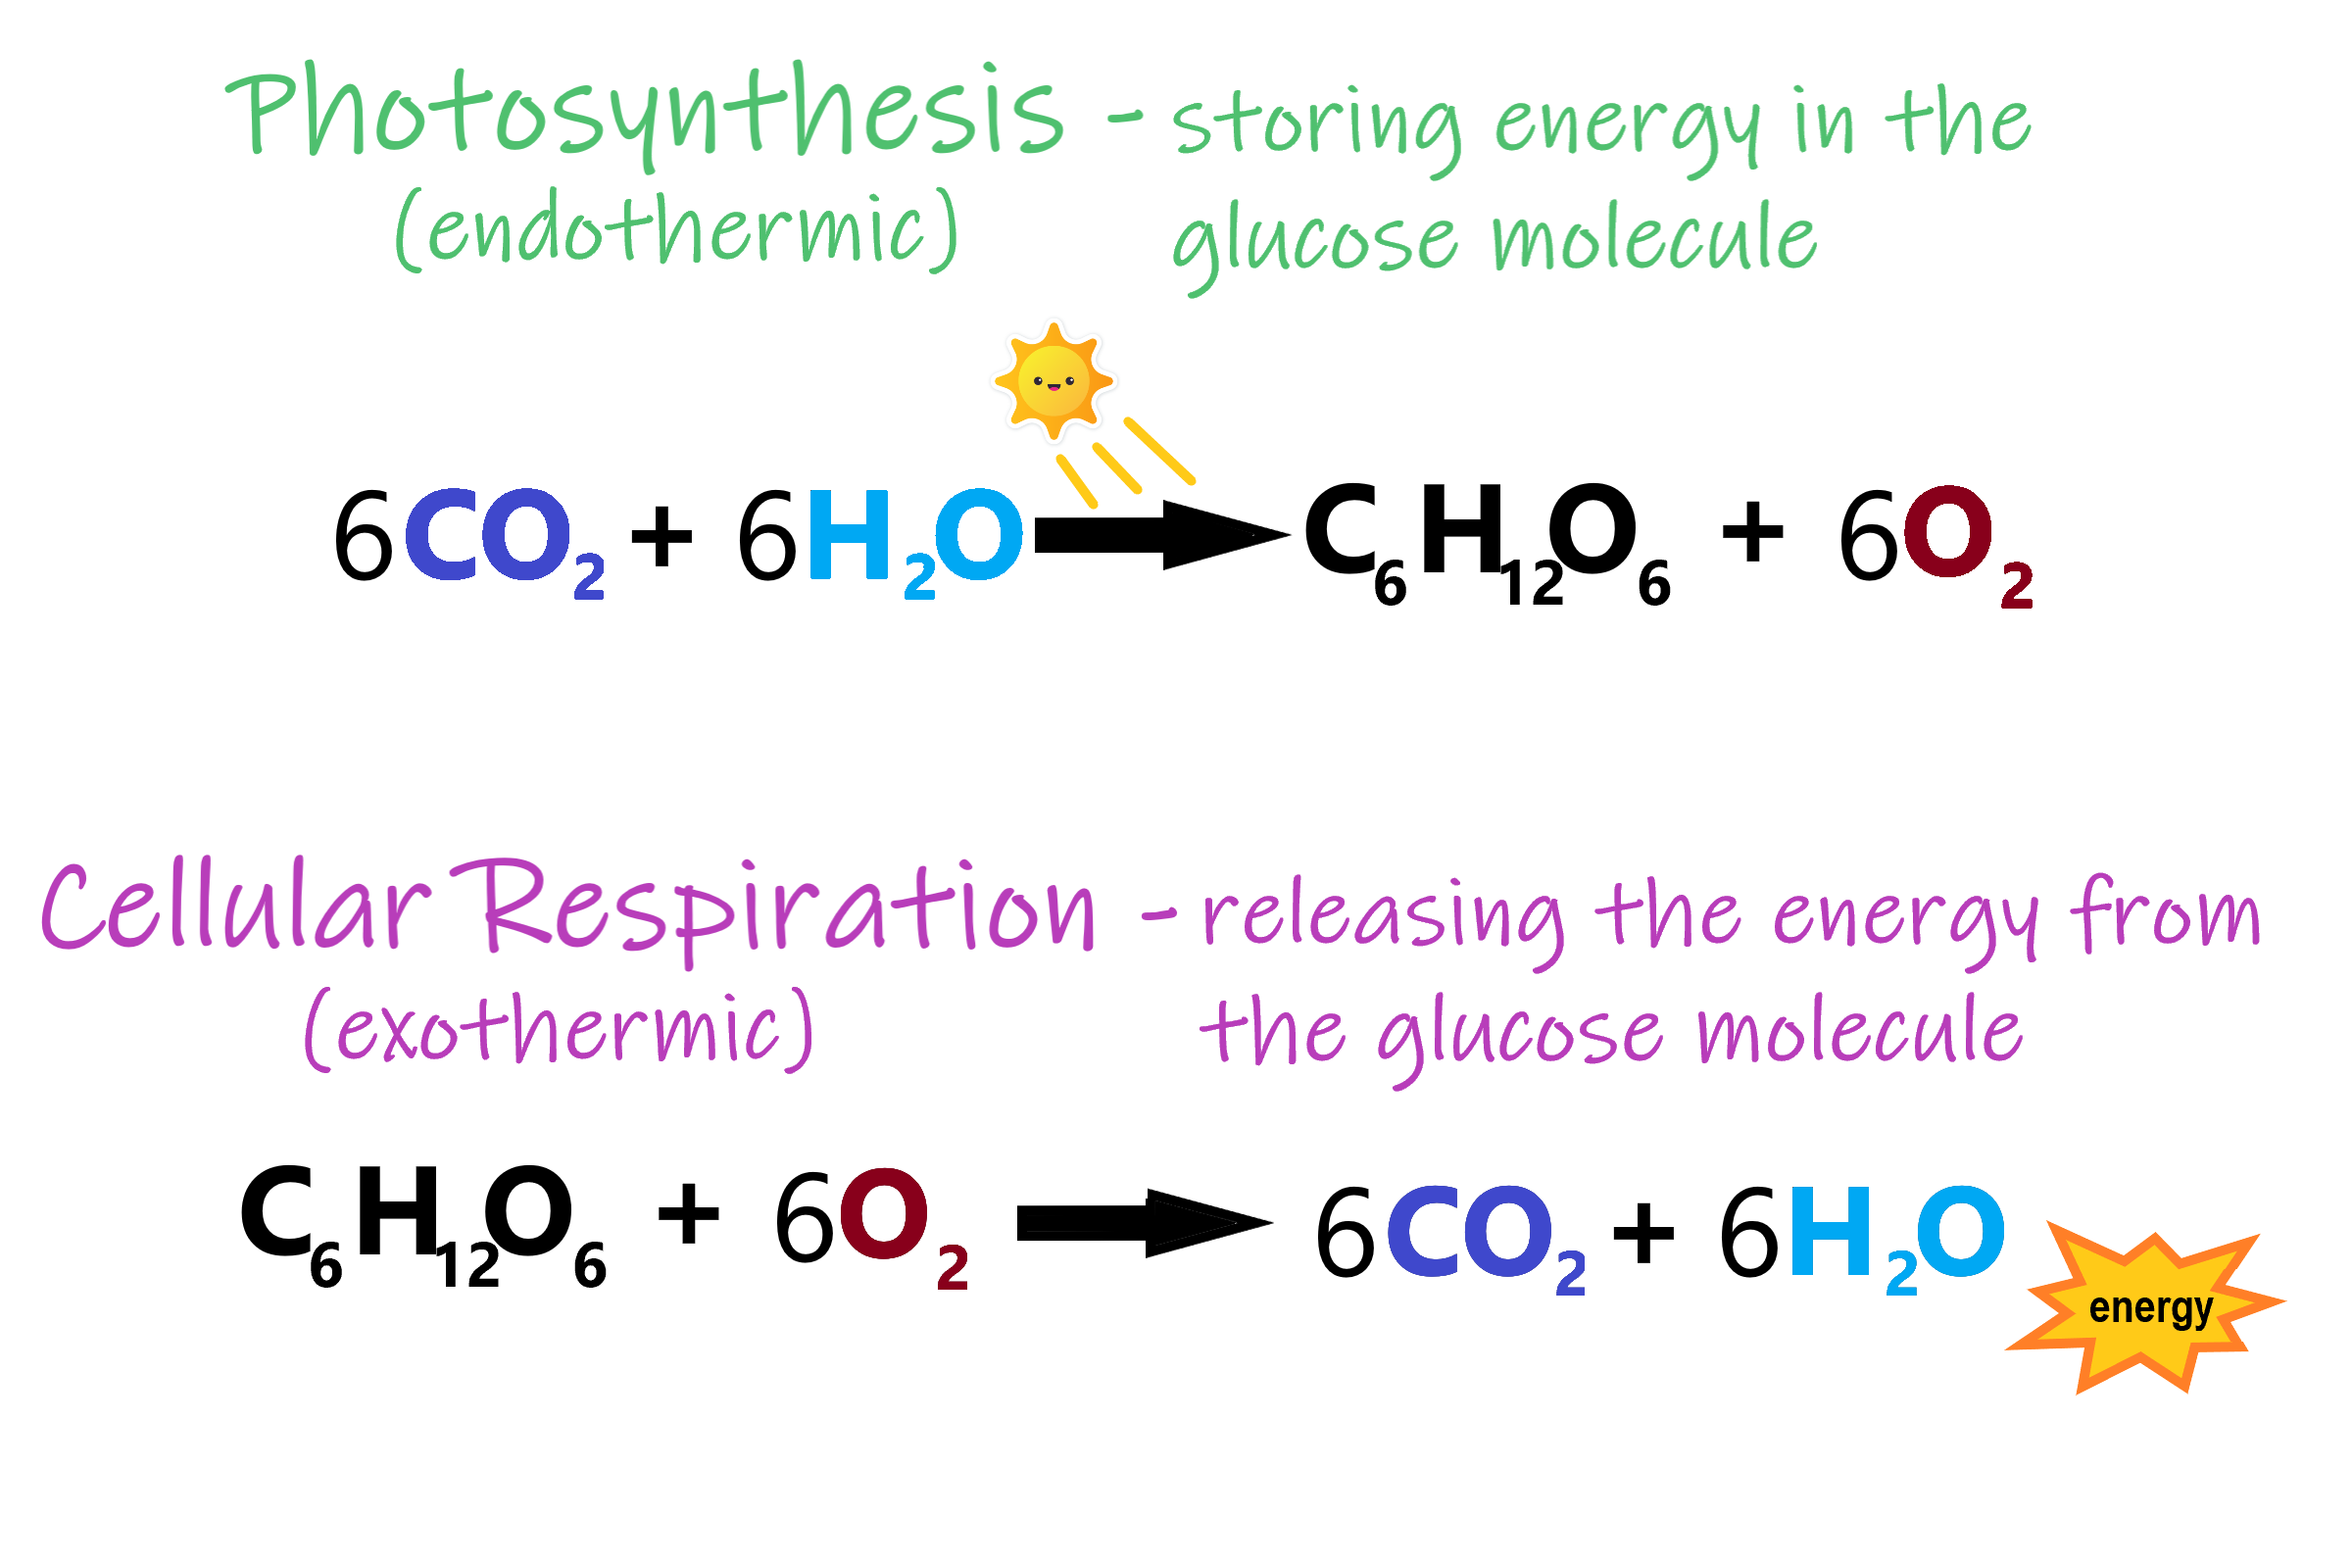 Image shows the formula for photosynthesis: Carbon dioxide and water are converted to glucose and oxygen, which is an endothermic reaction drawing its energy from the sun. Cellular respiration carries out the opposite reaction, breaking down glucose in the presence of oxygen to produce carbon dioxide and water, and releasing the energy previously stored in the glucose molecule, which is an exothermic reaction.